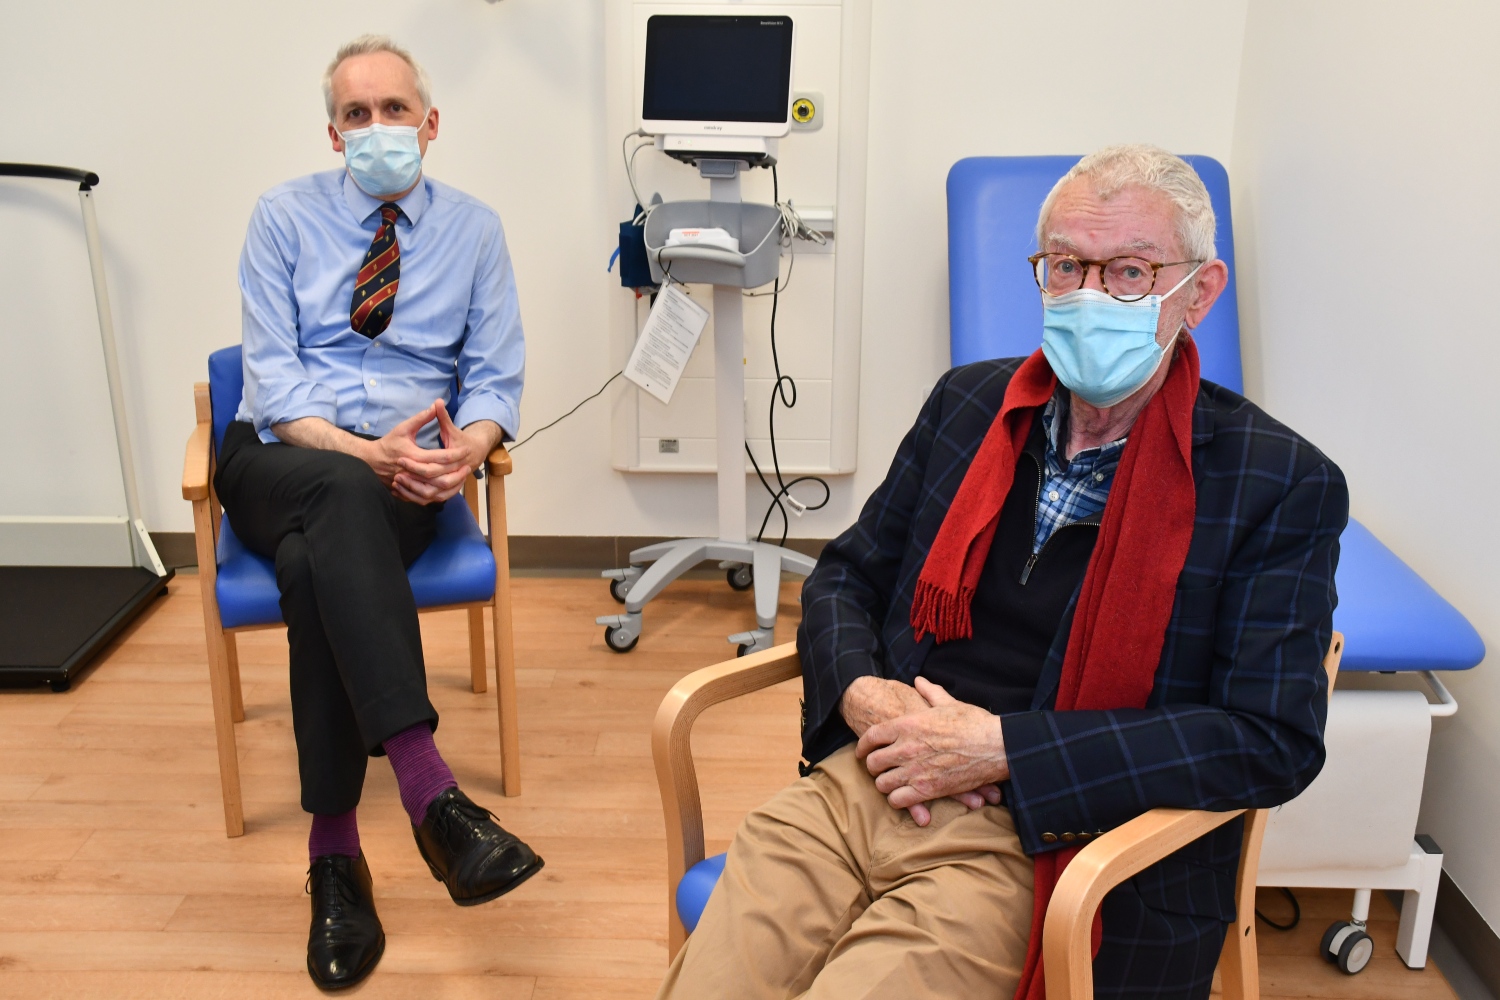 Two people sitting in chairs in a hospital clinic room, wearing masks.